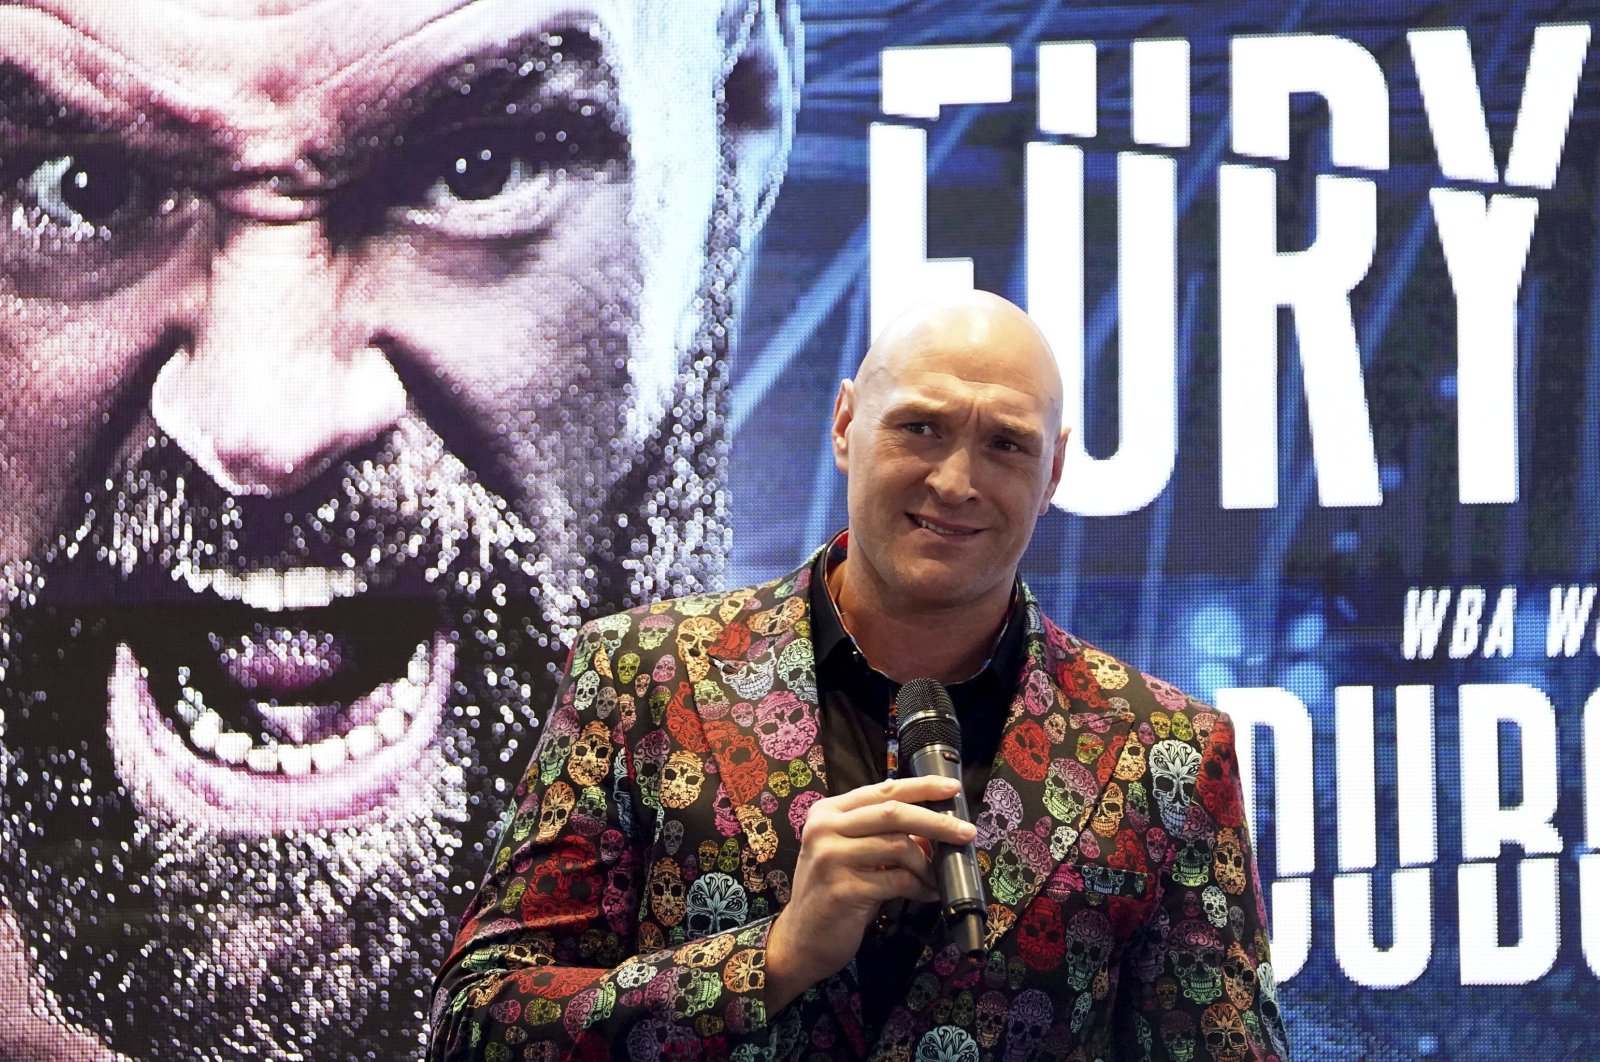 Britain&#039;s &quot;Gypsy King&quot; Tyson Fury attends a press conference at the Tottenham Hotspur Stadium, London, U.K., Oct. 20, 2022. (AP Photo)